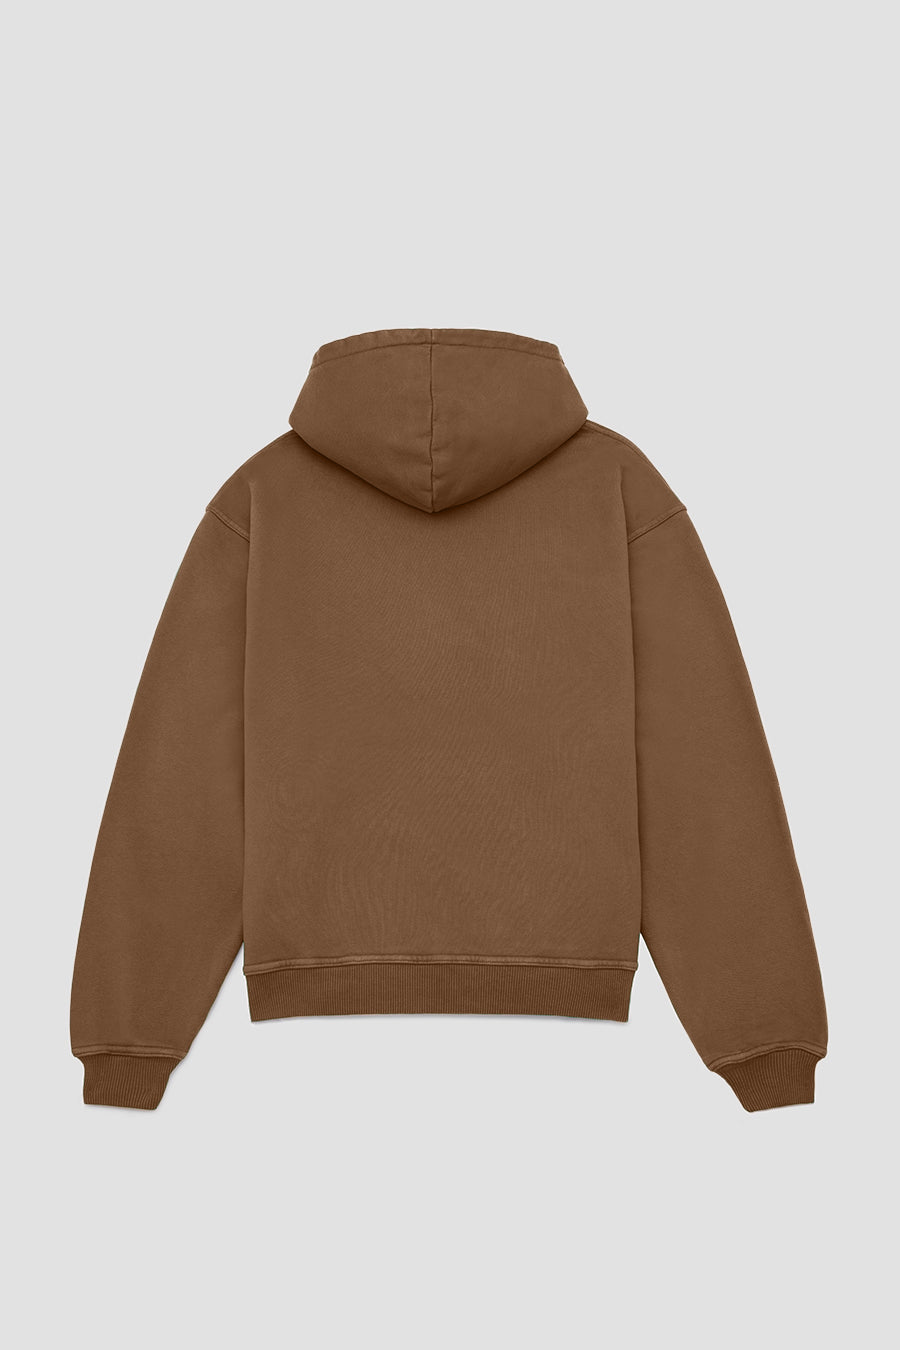 Brown Hoodie - only available in wholesale